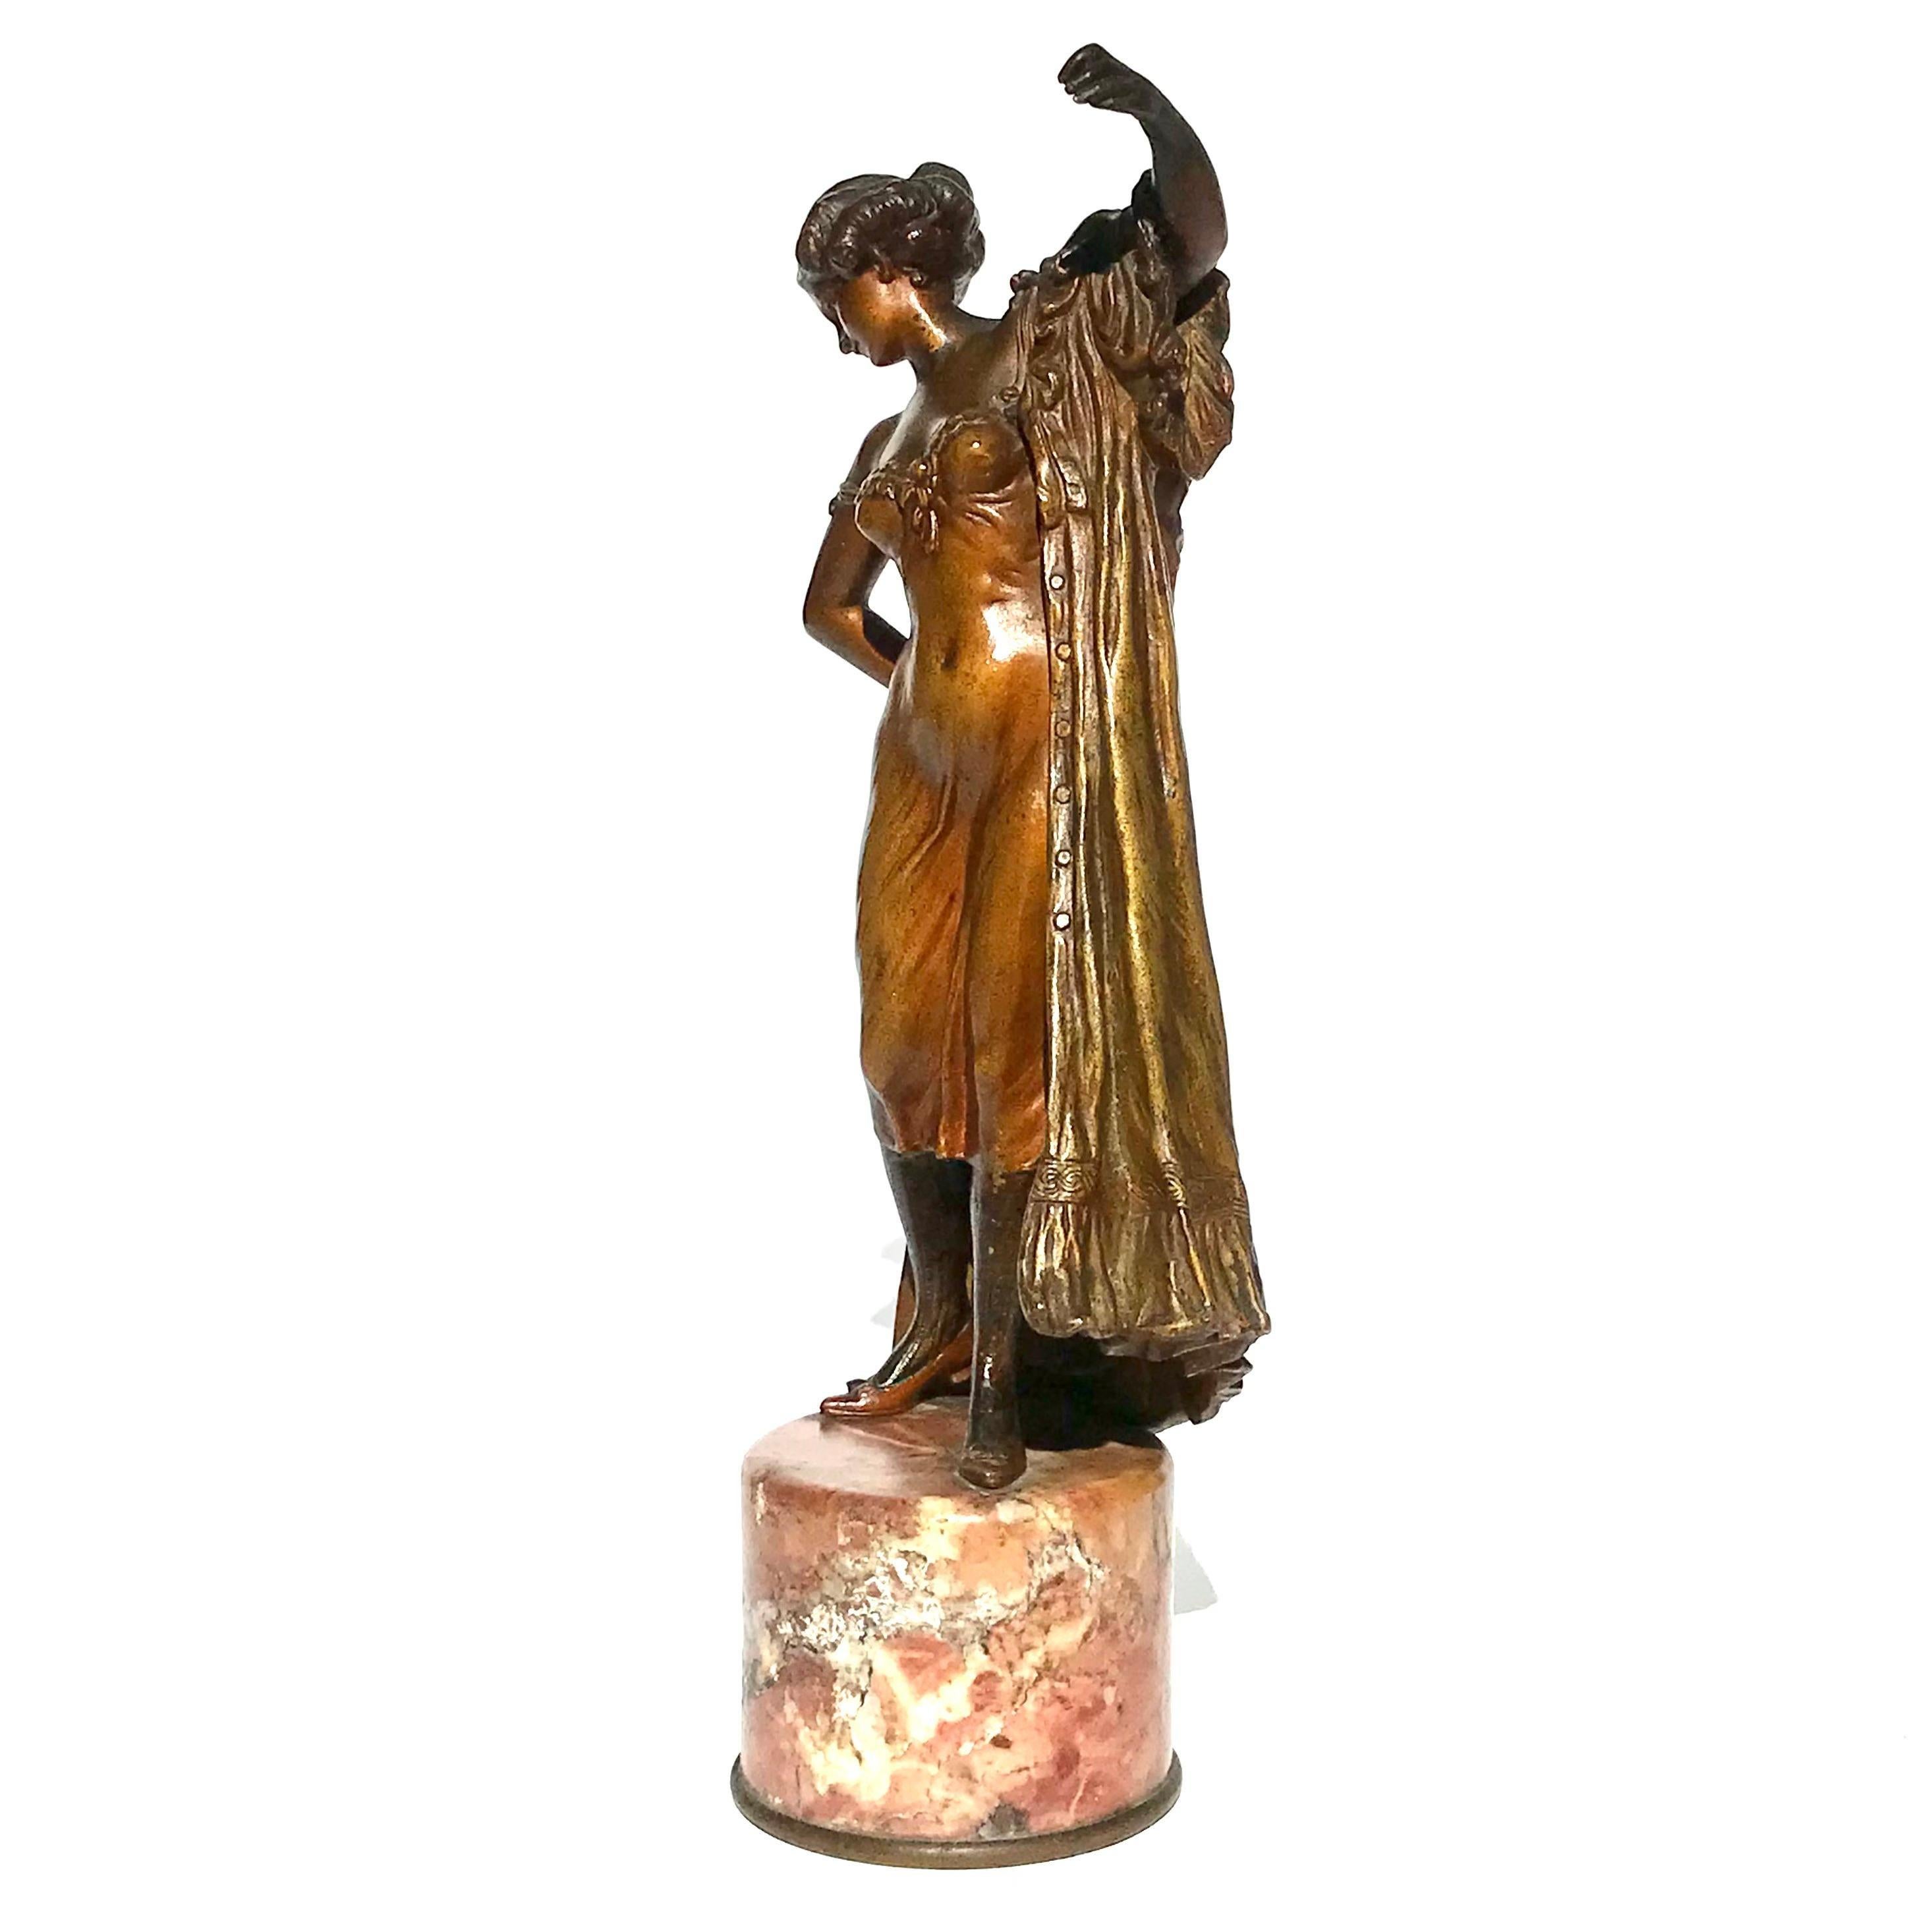 Franz Bergman Erotic Patinated Bronze Of A Woman Putting On Her Robe. Wearing a shear (almost) see through lingerie under garment; the lady is going through the motions to put on her dress. Tall and rare.
Height: 9.75 Inches with marble.
circa